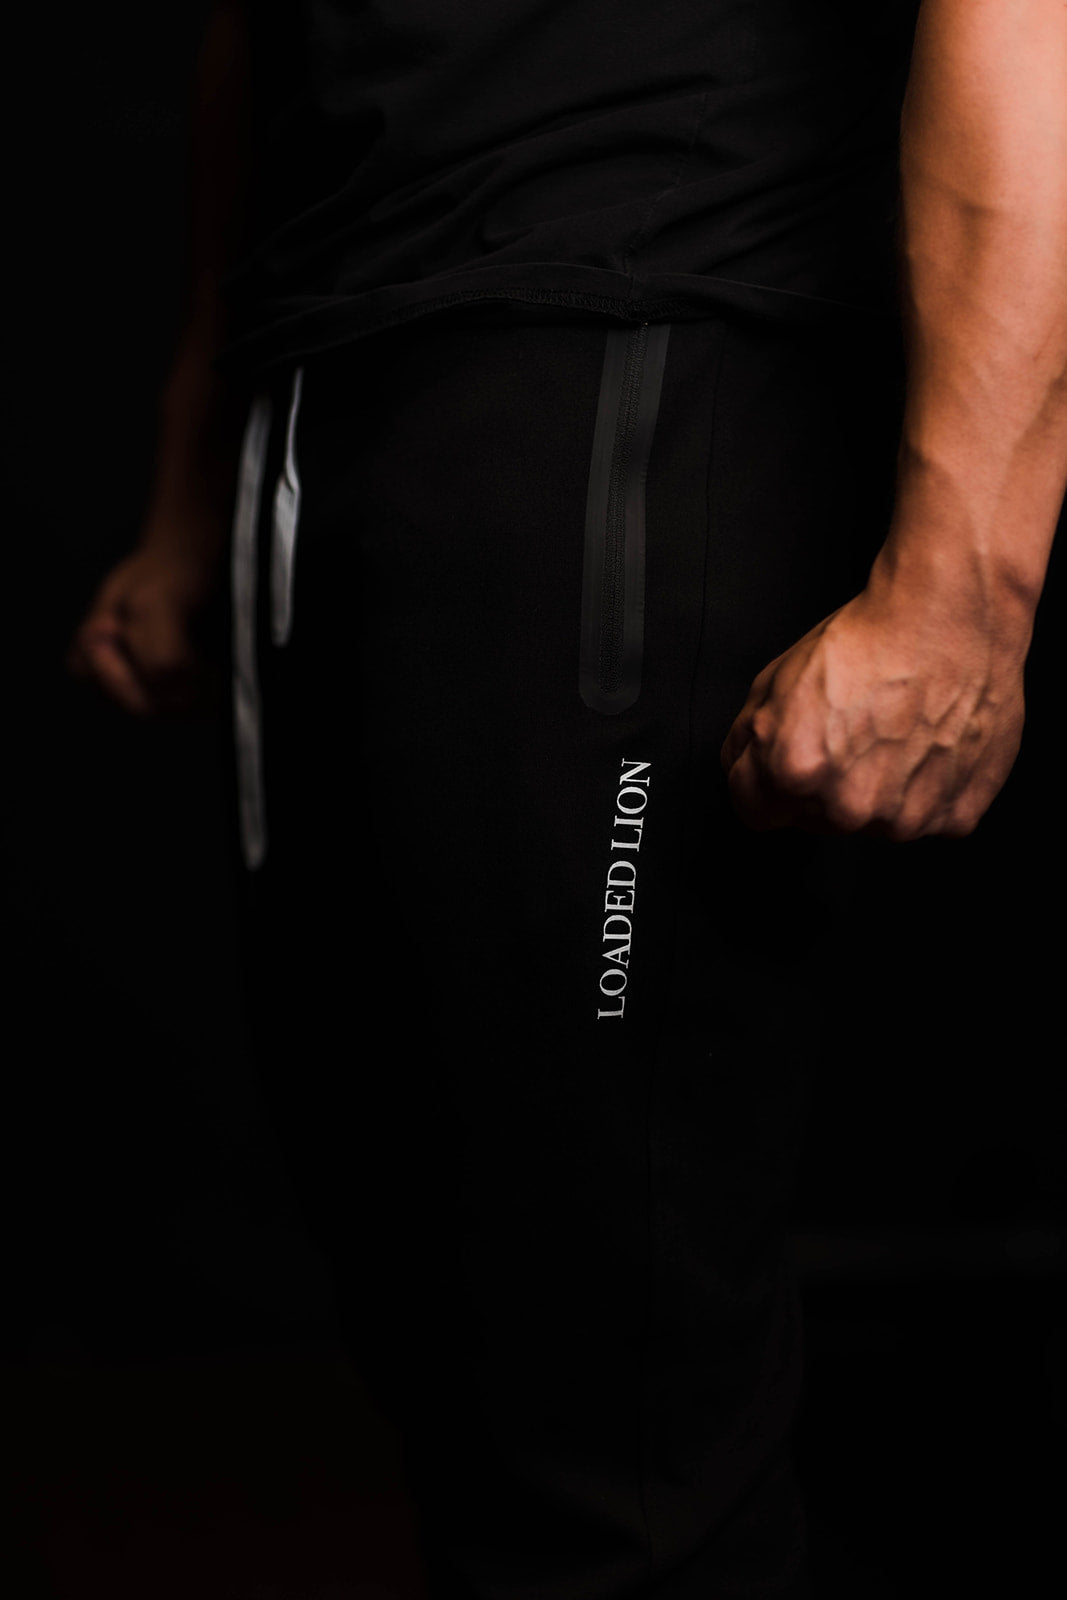 New Cotton Joggers Pants Men Autumn Running Sweatpants Skinny Track Pants  Gym Fitness Training Trousers Male Sport 2020